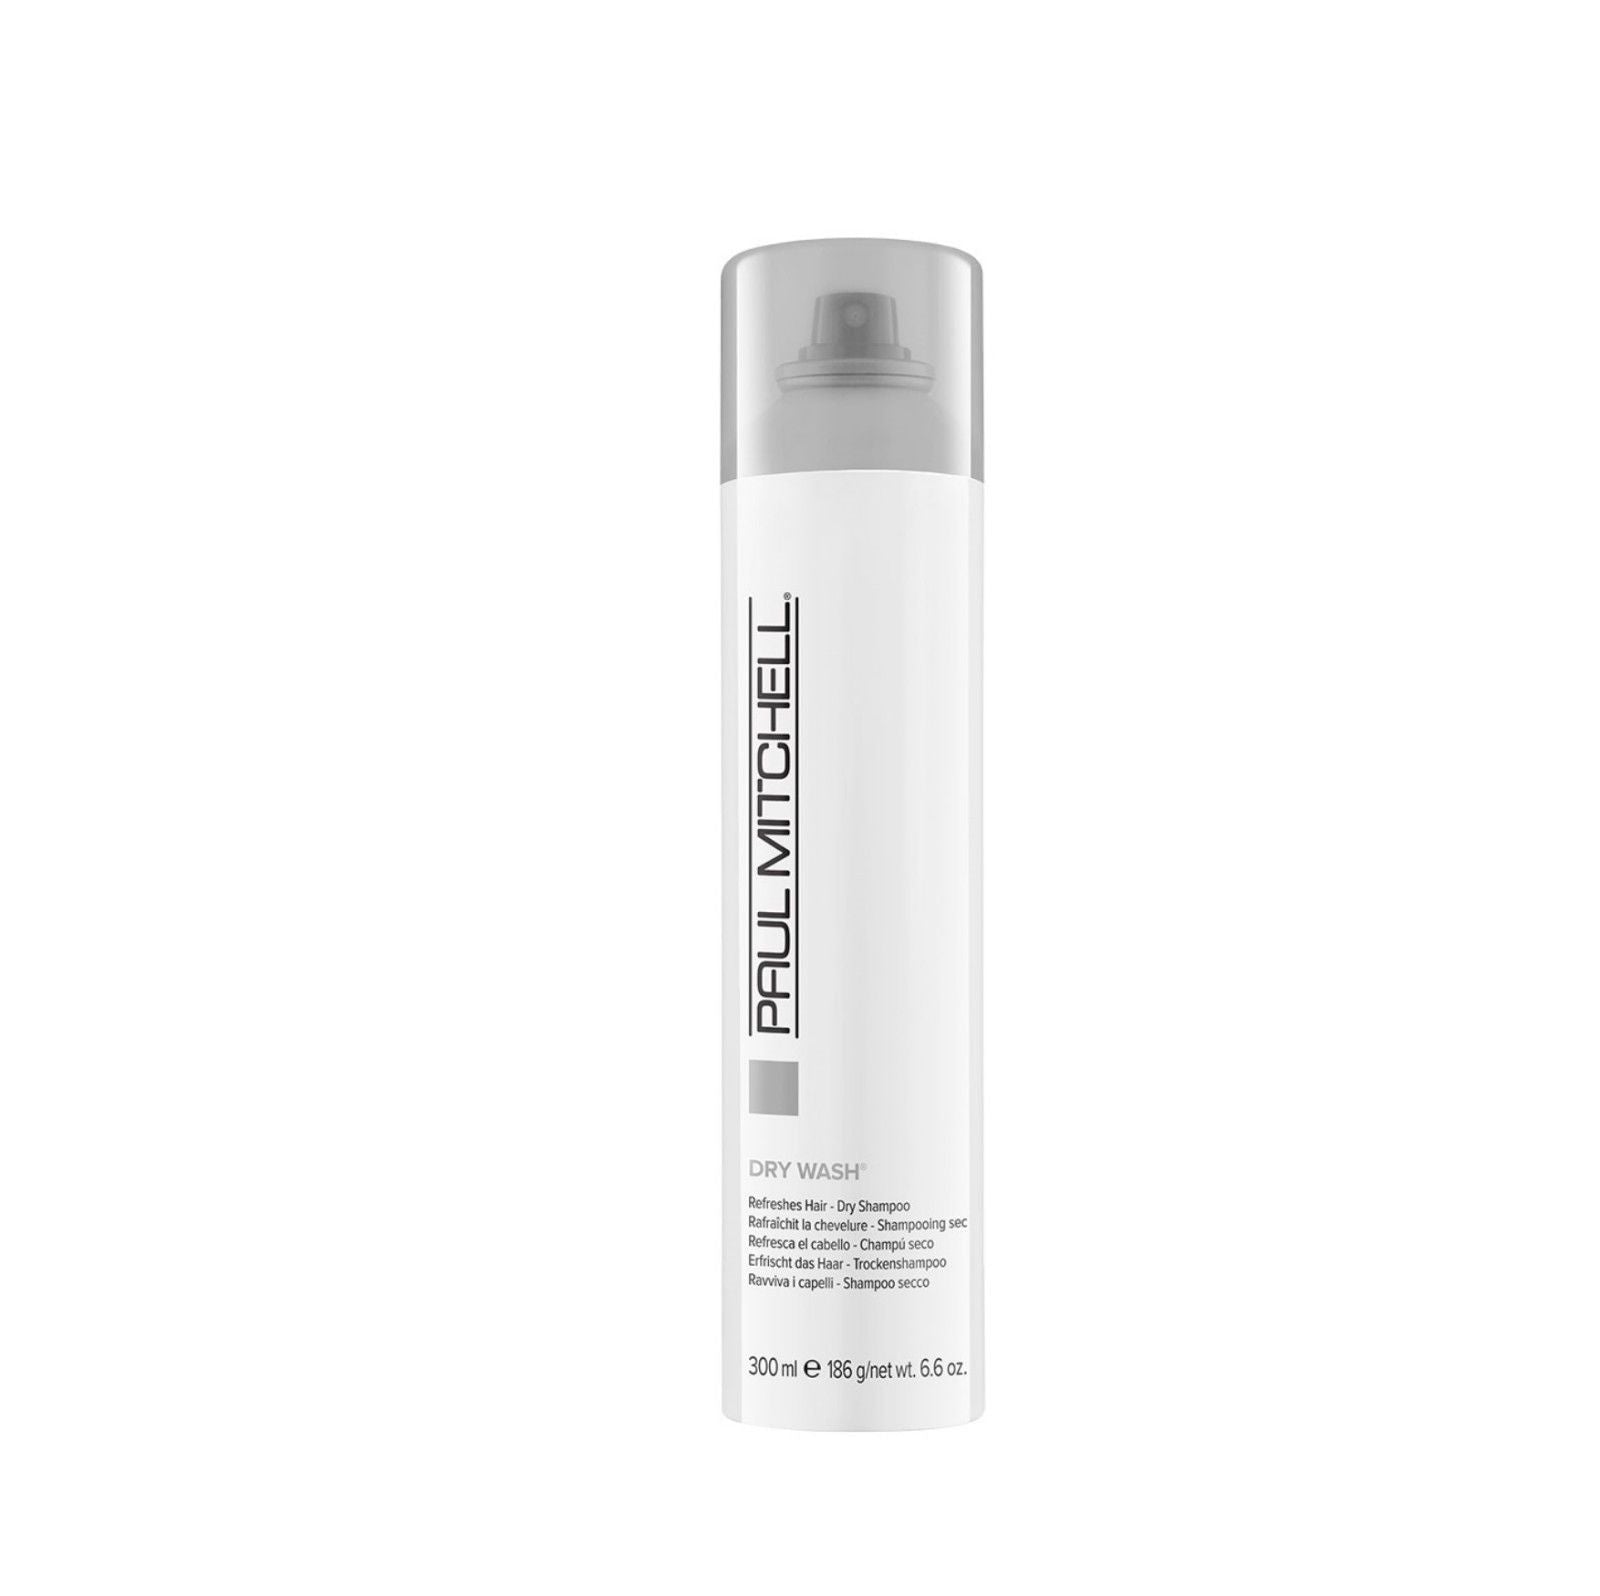 Paul Mitchell Dry Wash Refreshes Hair Dry Shampoo 300ml - On Line Hair Depot